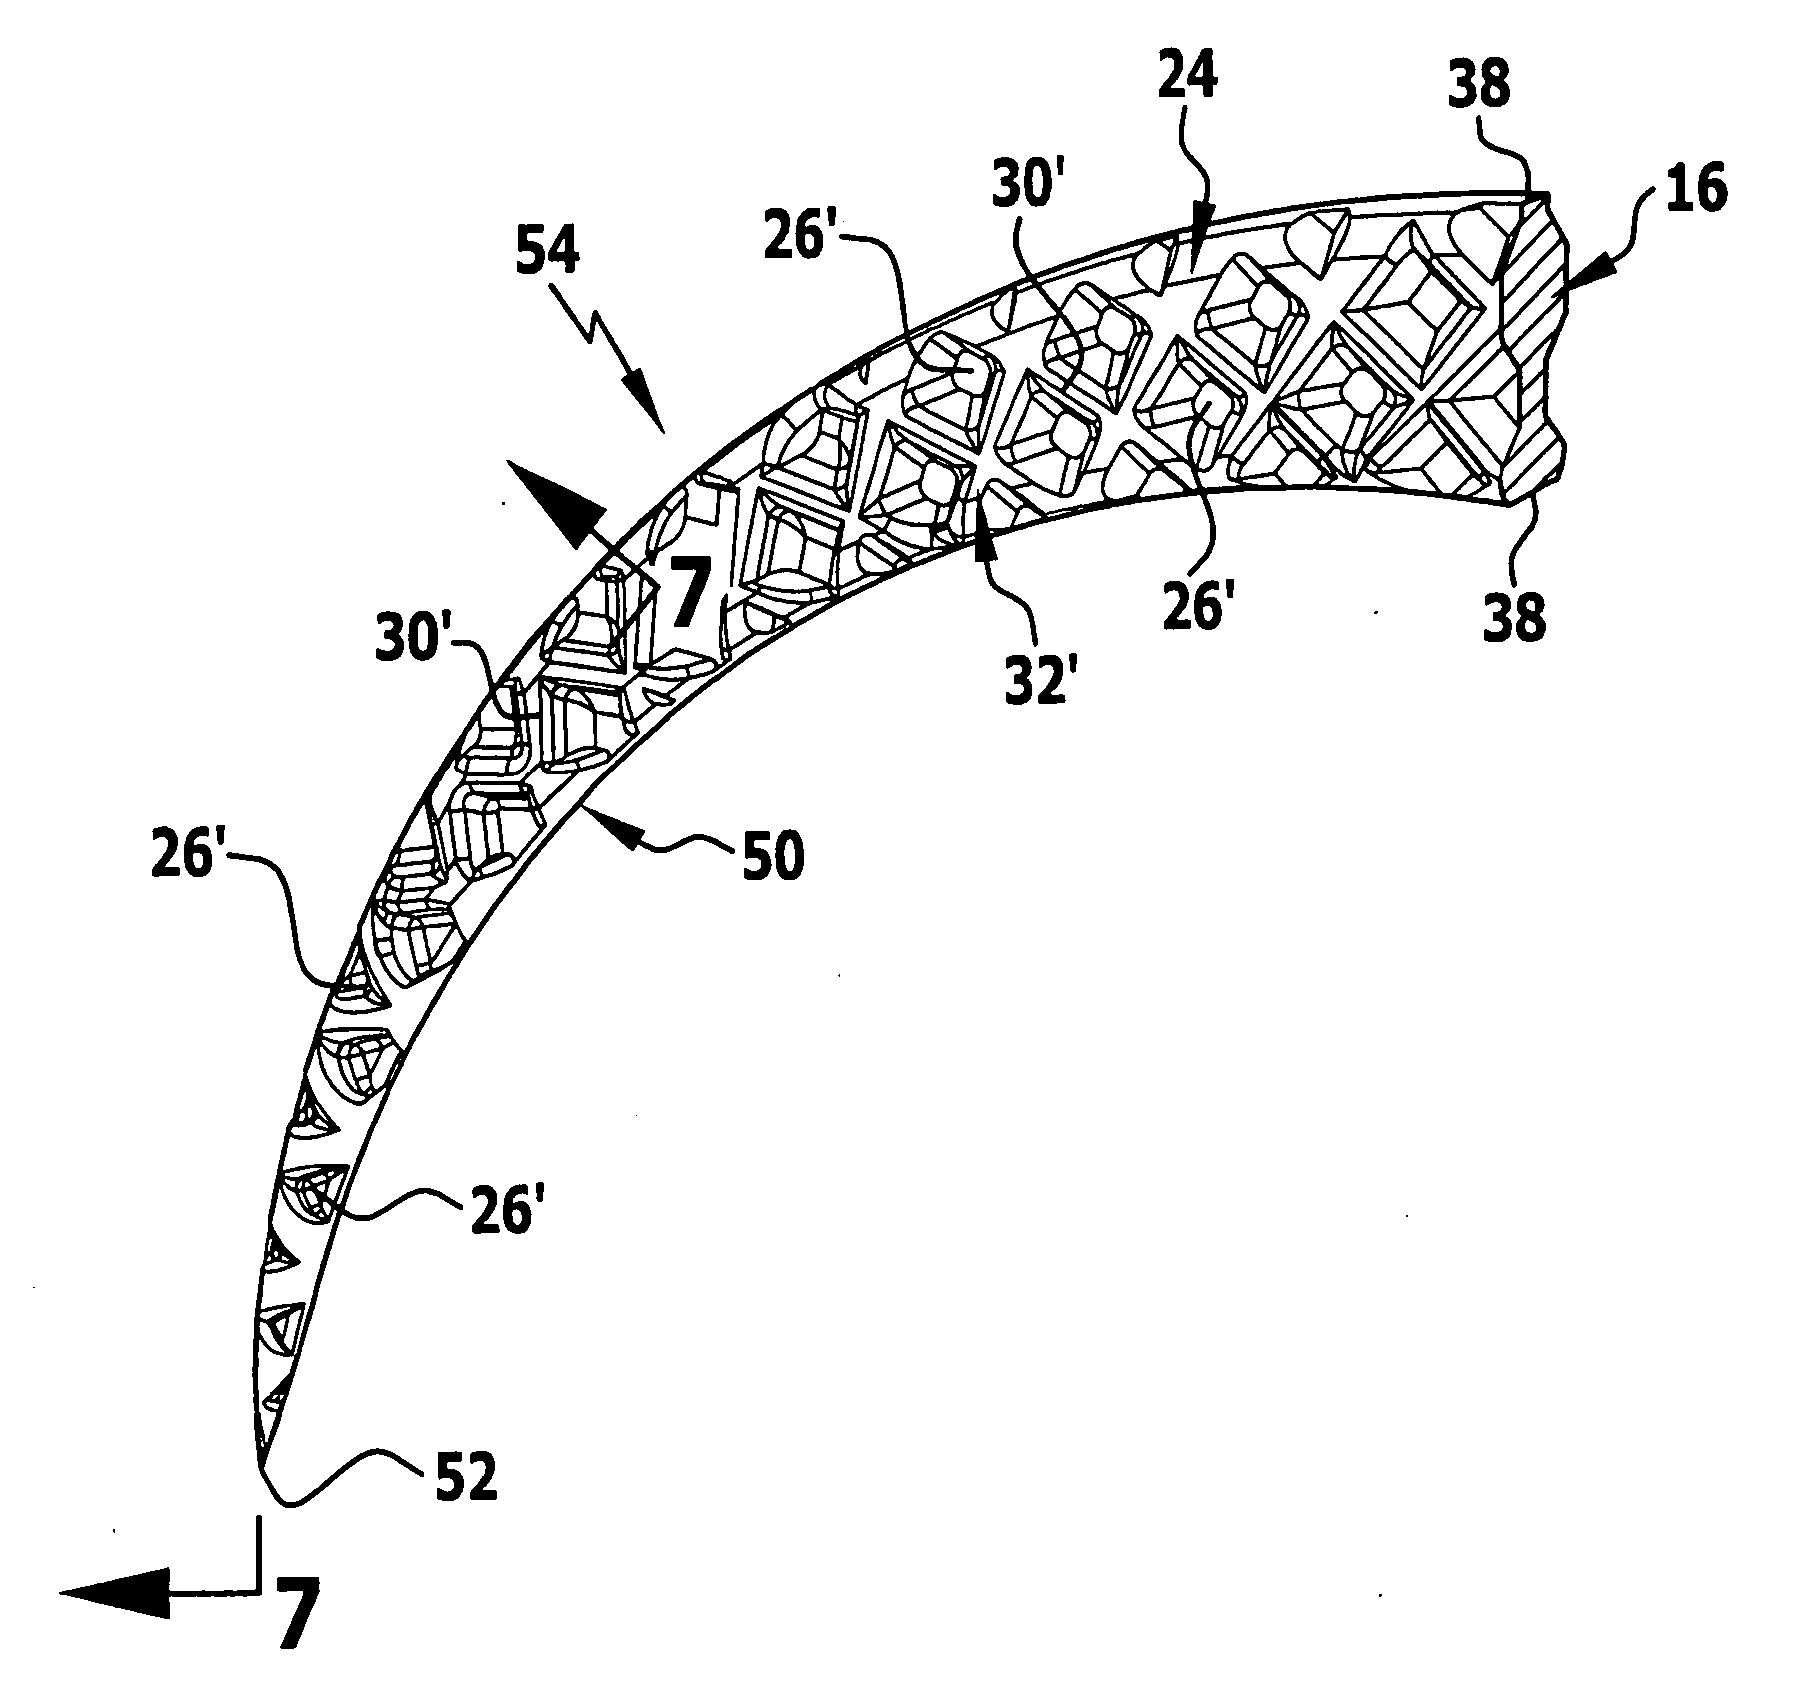 Surgical needle and method of manufacturing a surgical needle